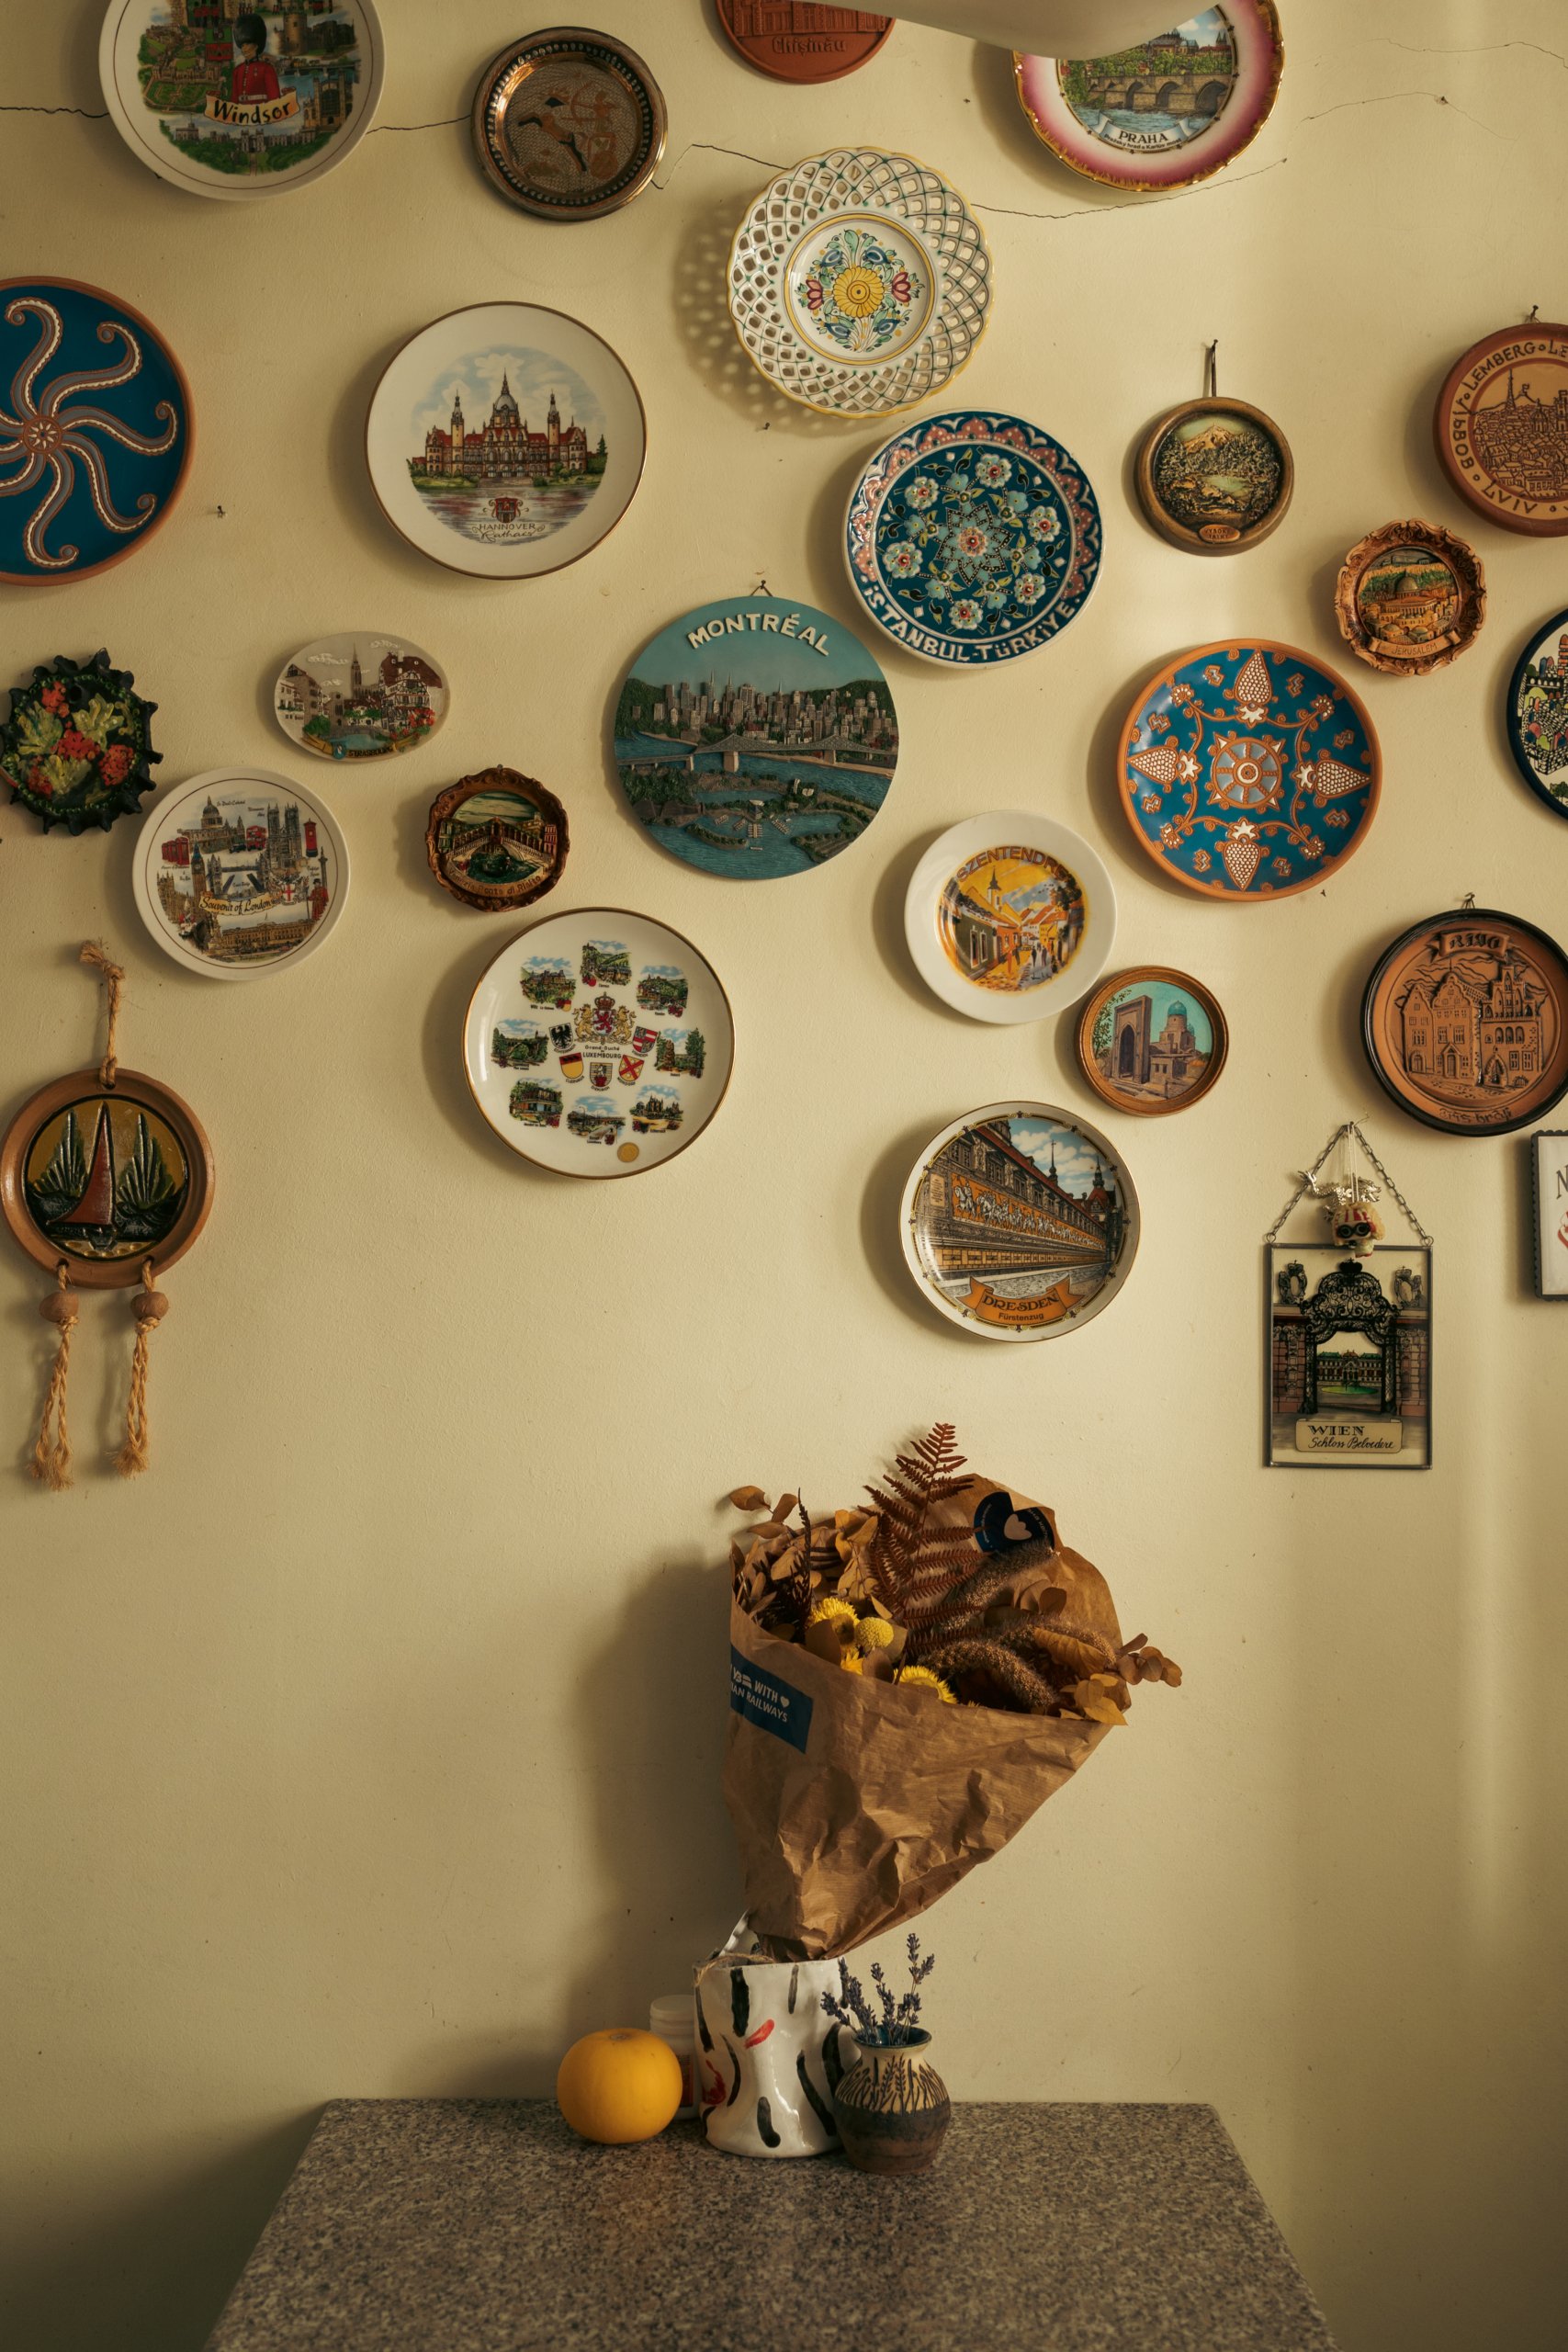 A wall with decorative souvenir plates from around the world.